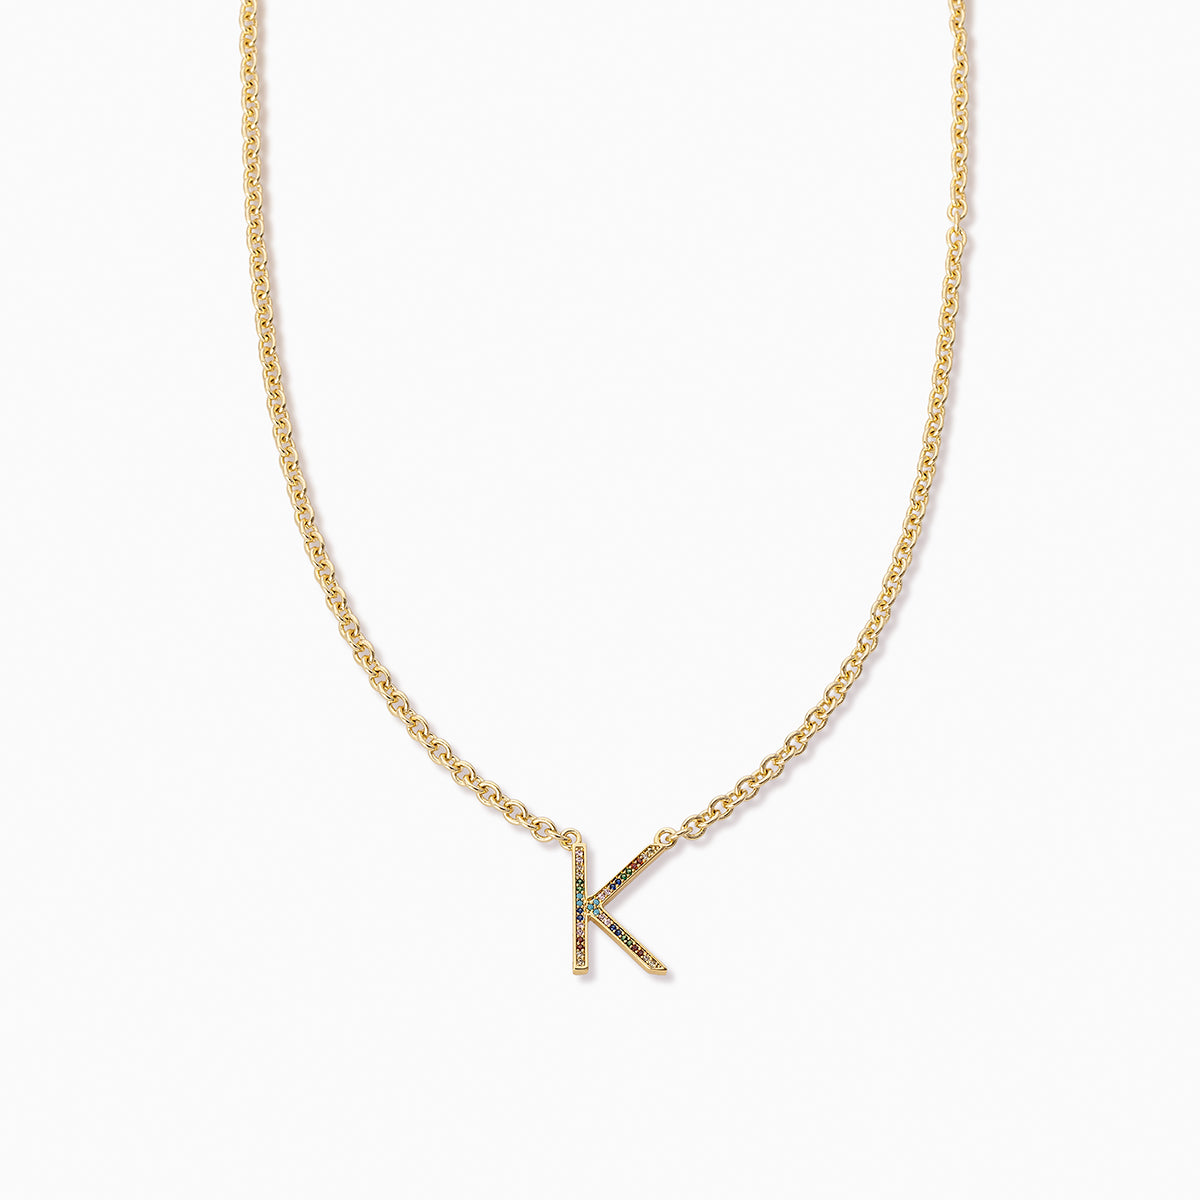 Know Me Necklace | Gold K | Product Image | Uncommon James